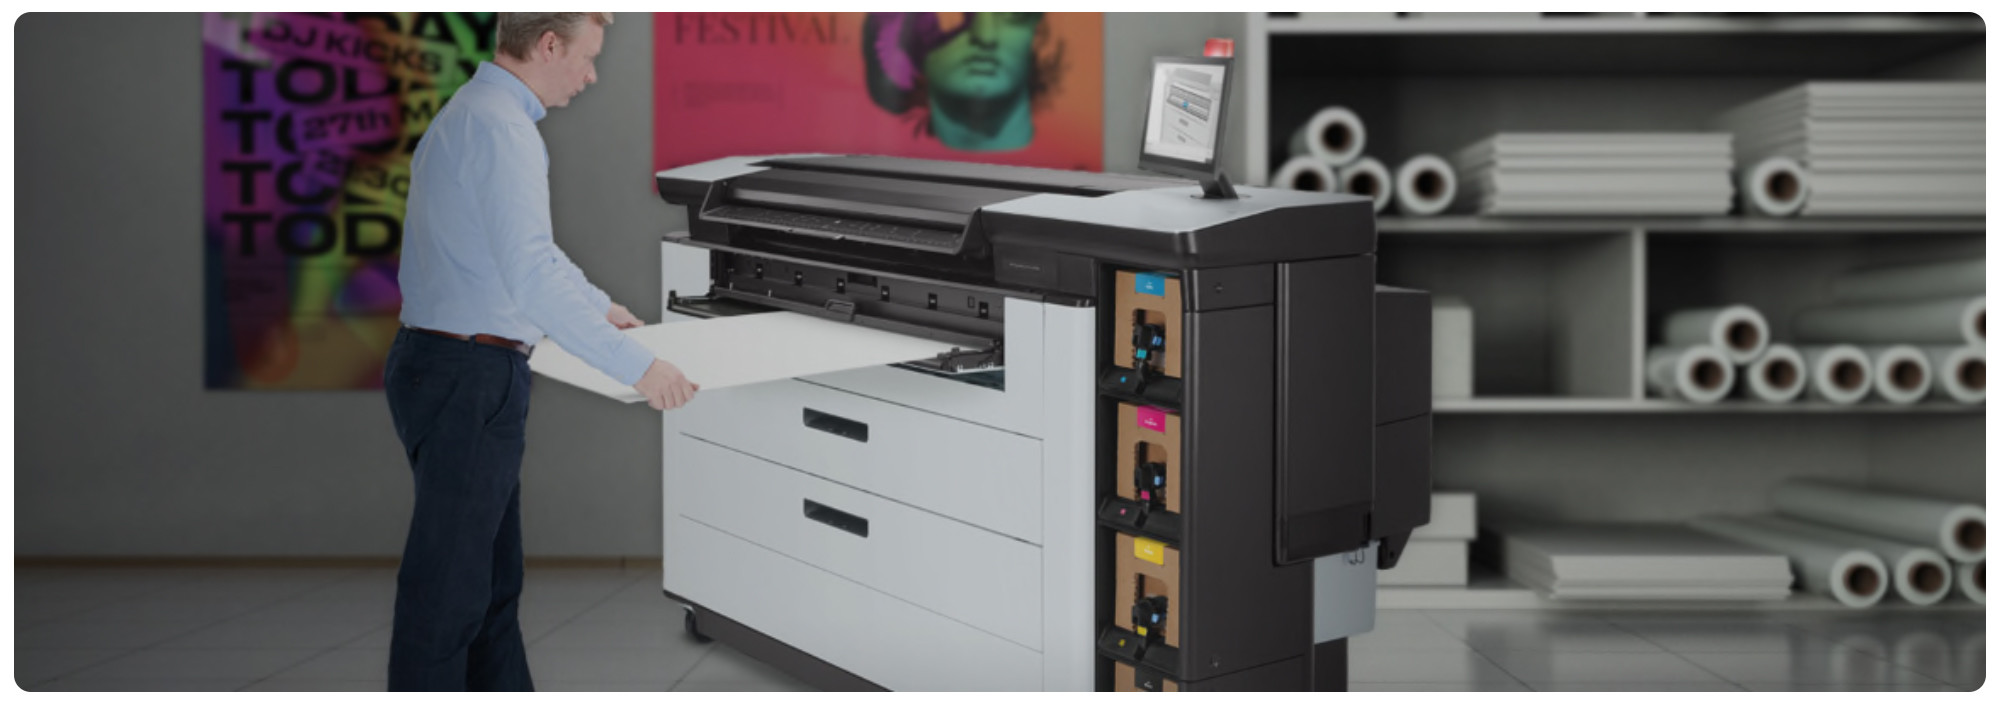 HP PageWide XL Pro 8200 office operation scene variation